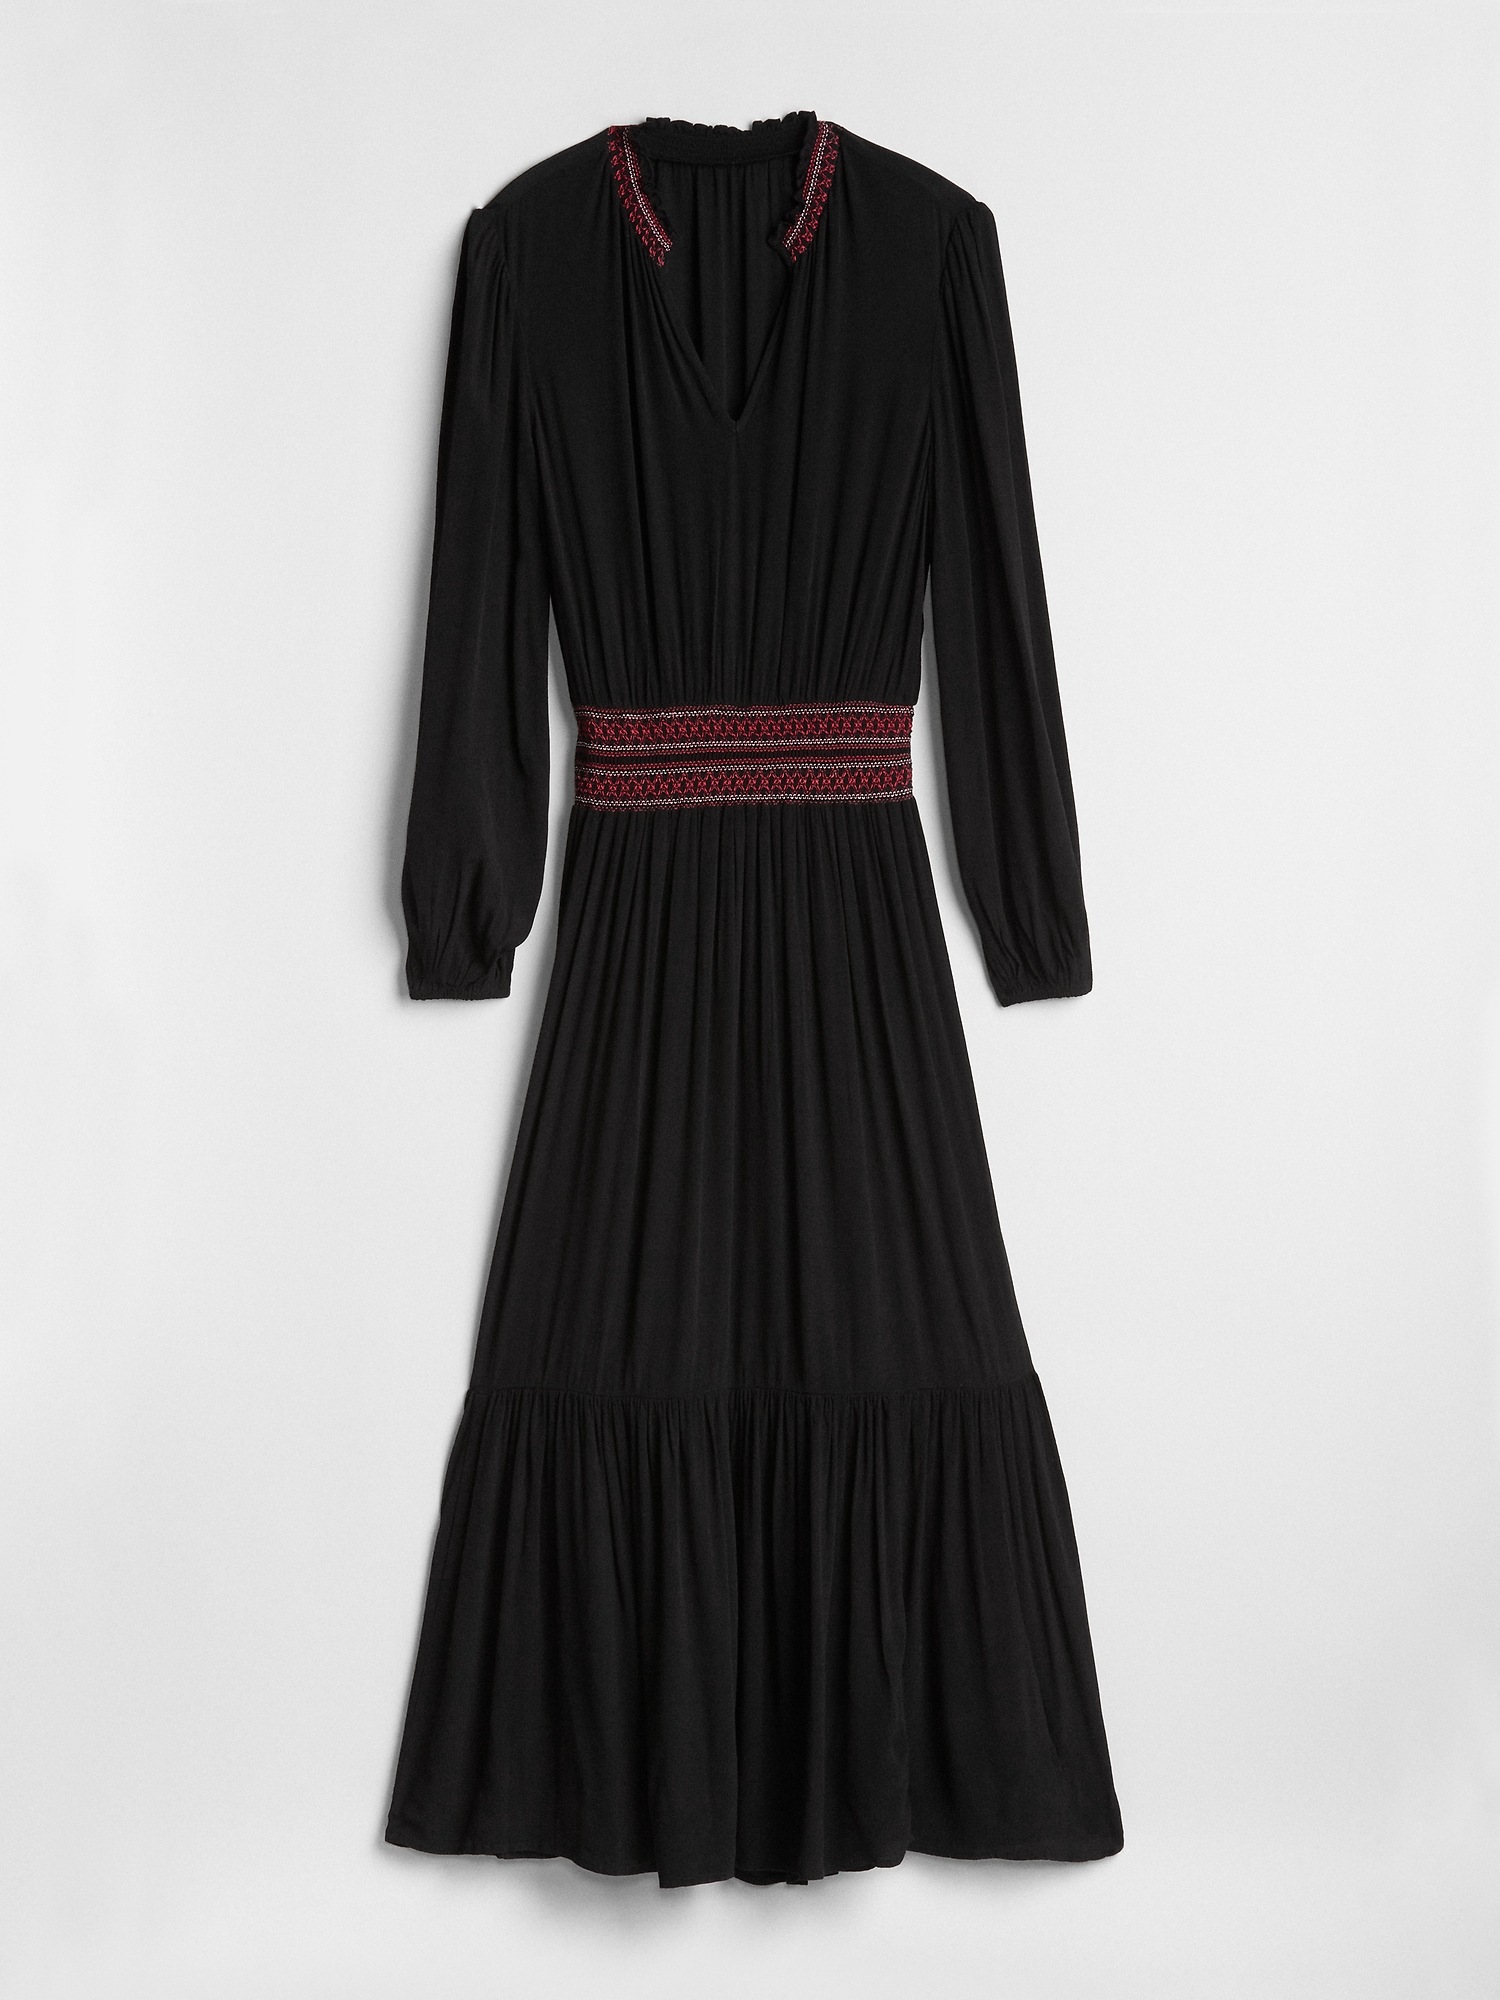 Papinelle | Modal Soft Pleat Front Maxi Nightgown in Black